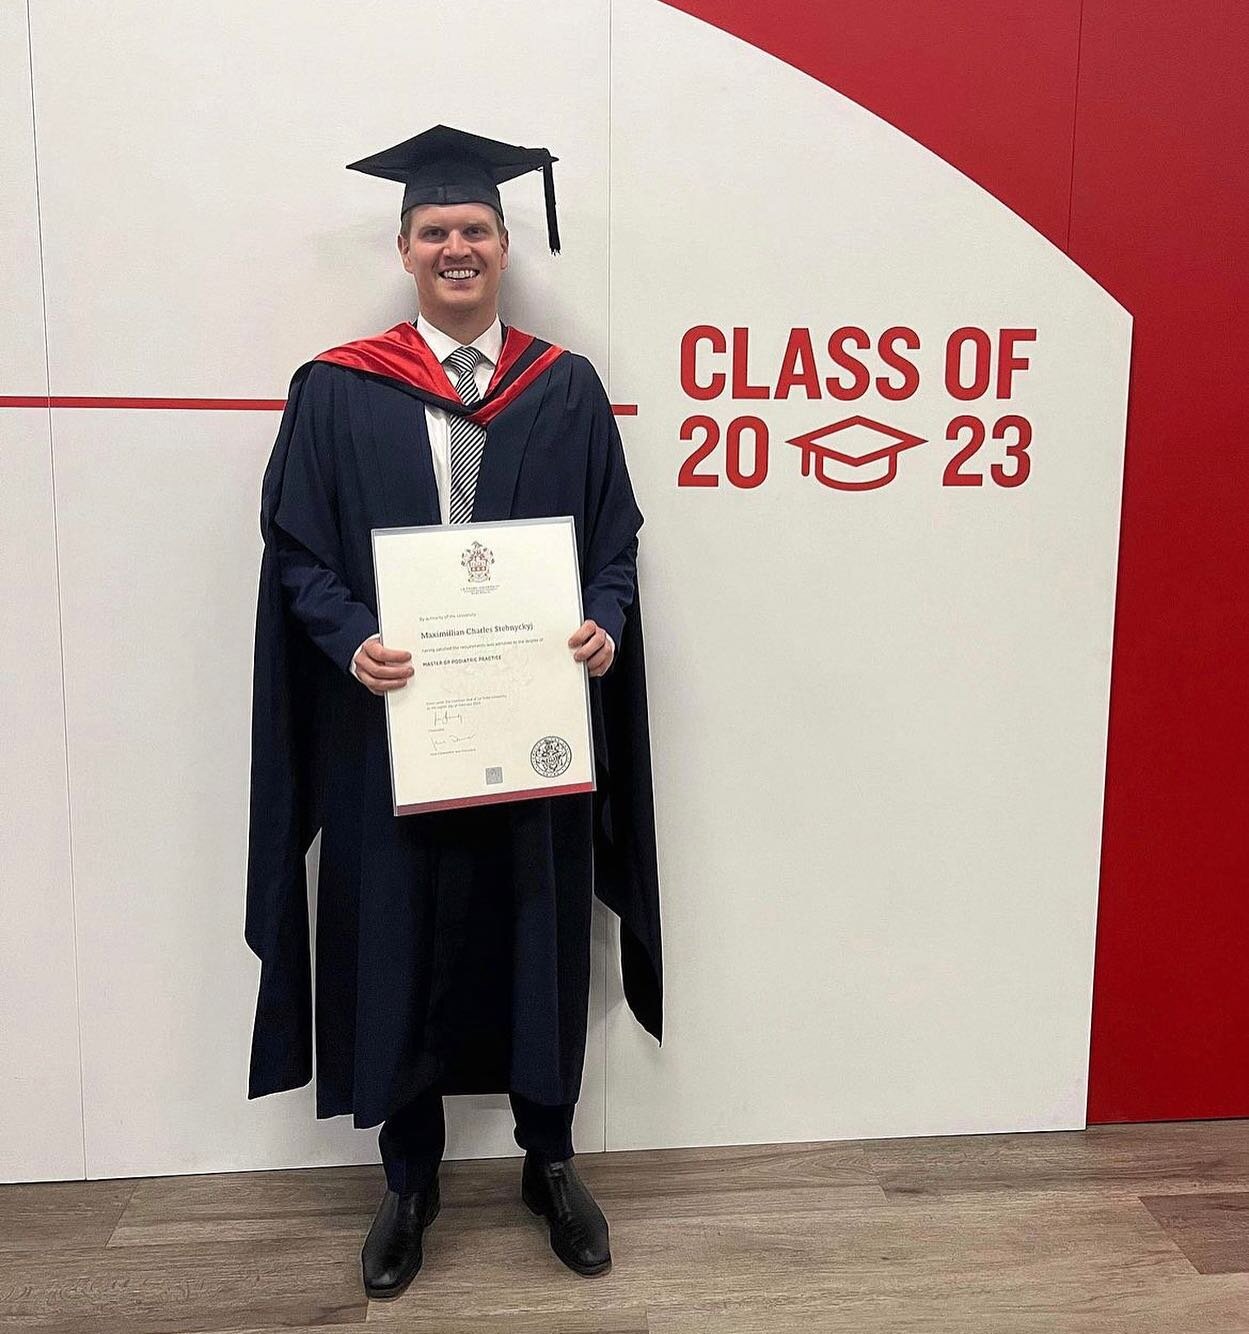 Hip, hip hooray! Our superstar Podiatrist graduated last week for the end of 2022! Max&rsquo;s graduation is a testament to his hard work, dedication, and commitment. Here's to Max! 🎉